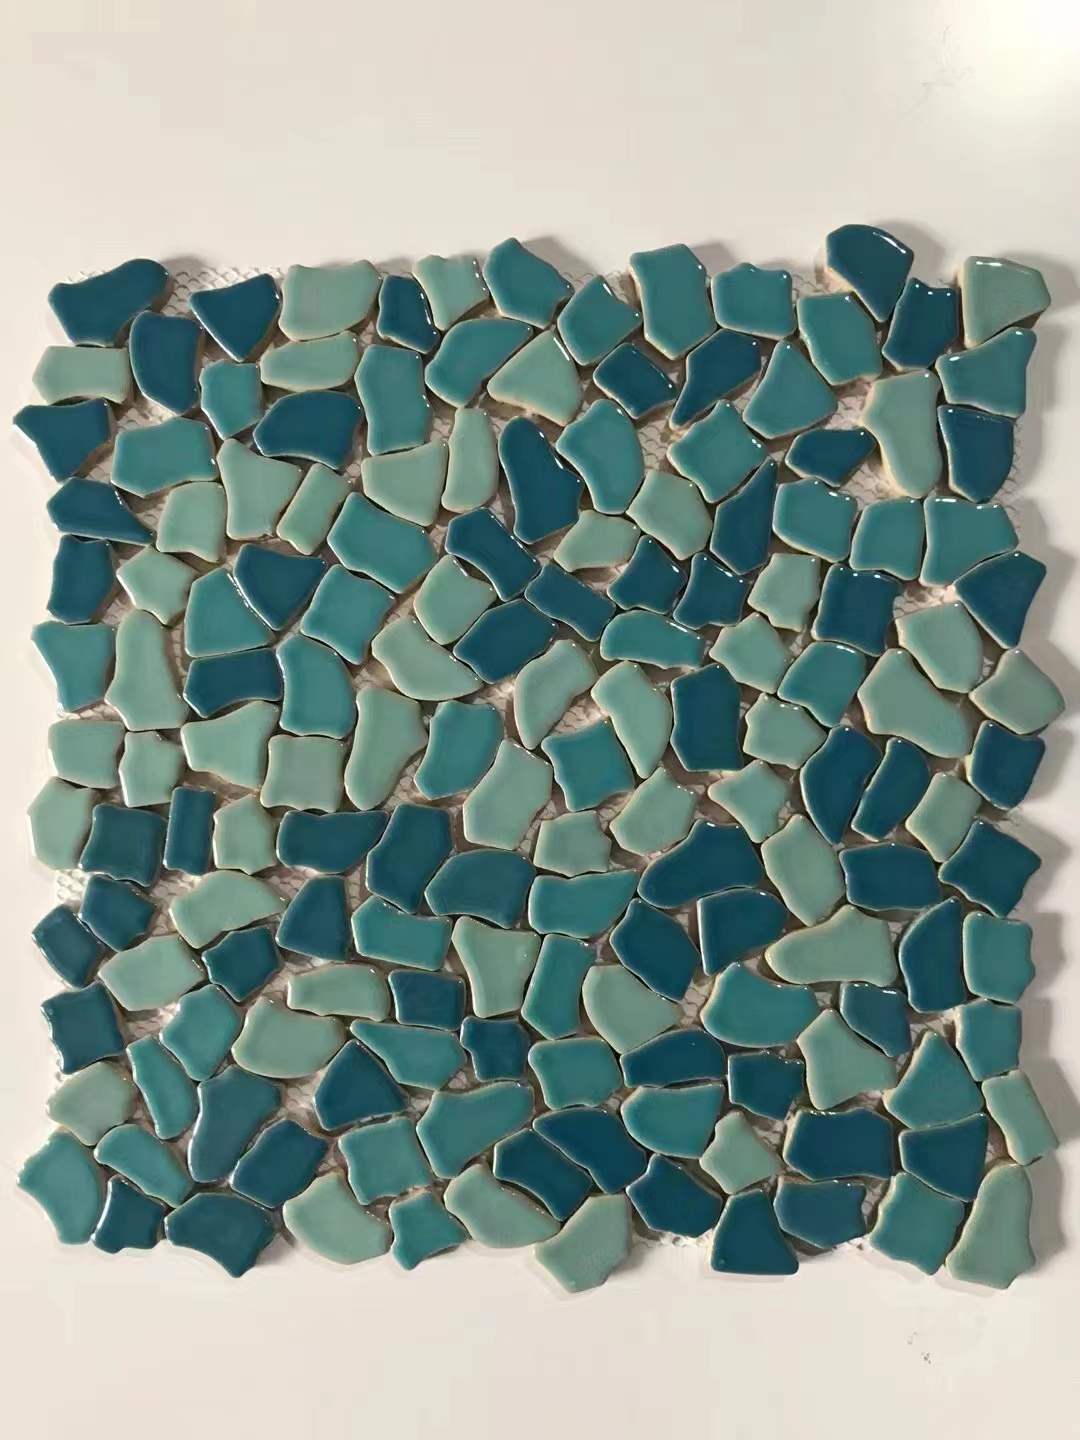 Blue and Green Pebble Tile